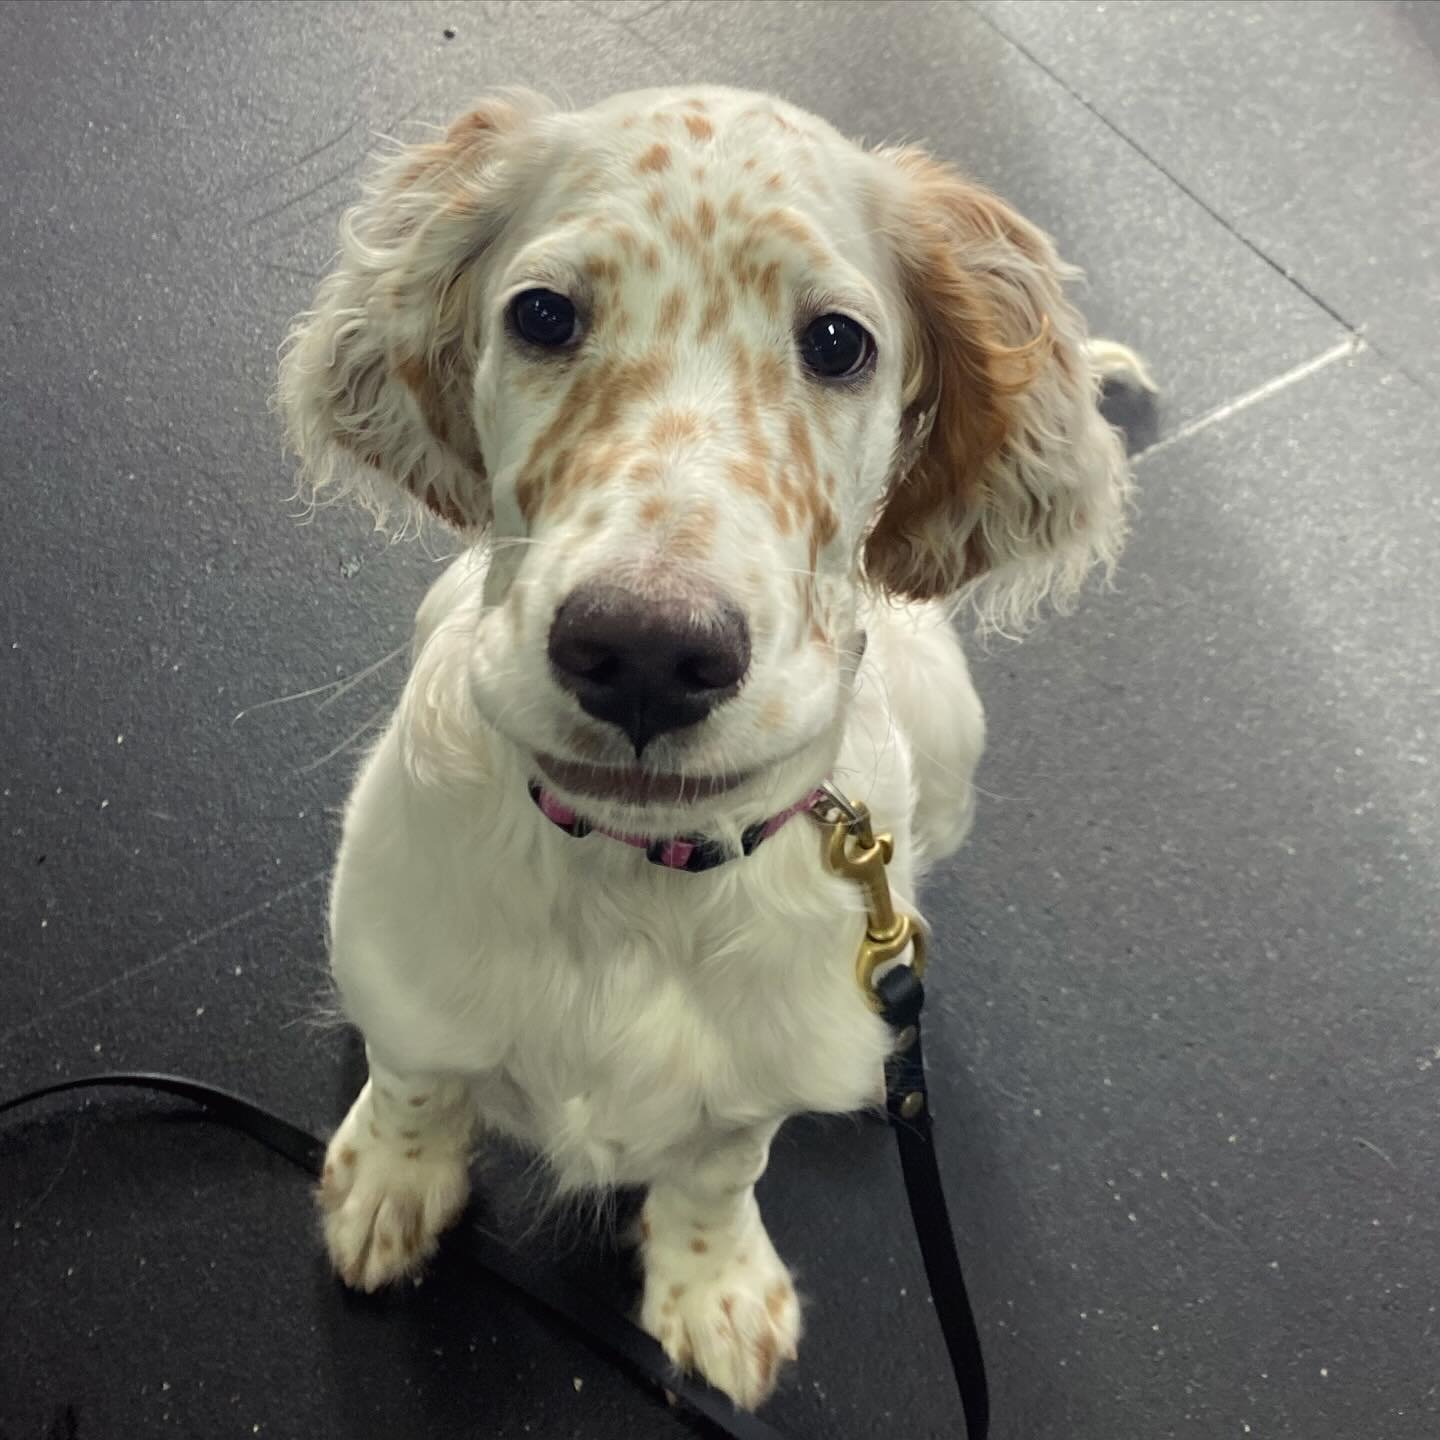 We had a special little visitor yesterday afternoon! Miss Gelato (Jeli) popped into MML with her mum Kiara! Jeli, you are a bundle of delight 🌸💜@english.setter.alby 
.
.
#puppylove #englishsetter #instapuppy #newpuppy #cutie #bundleofjoy #pup #engl